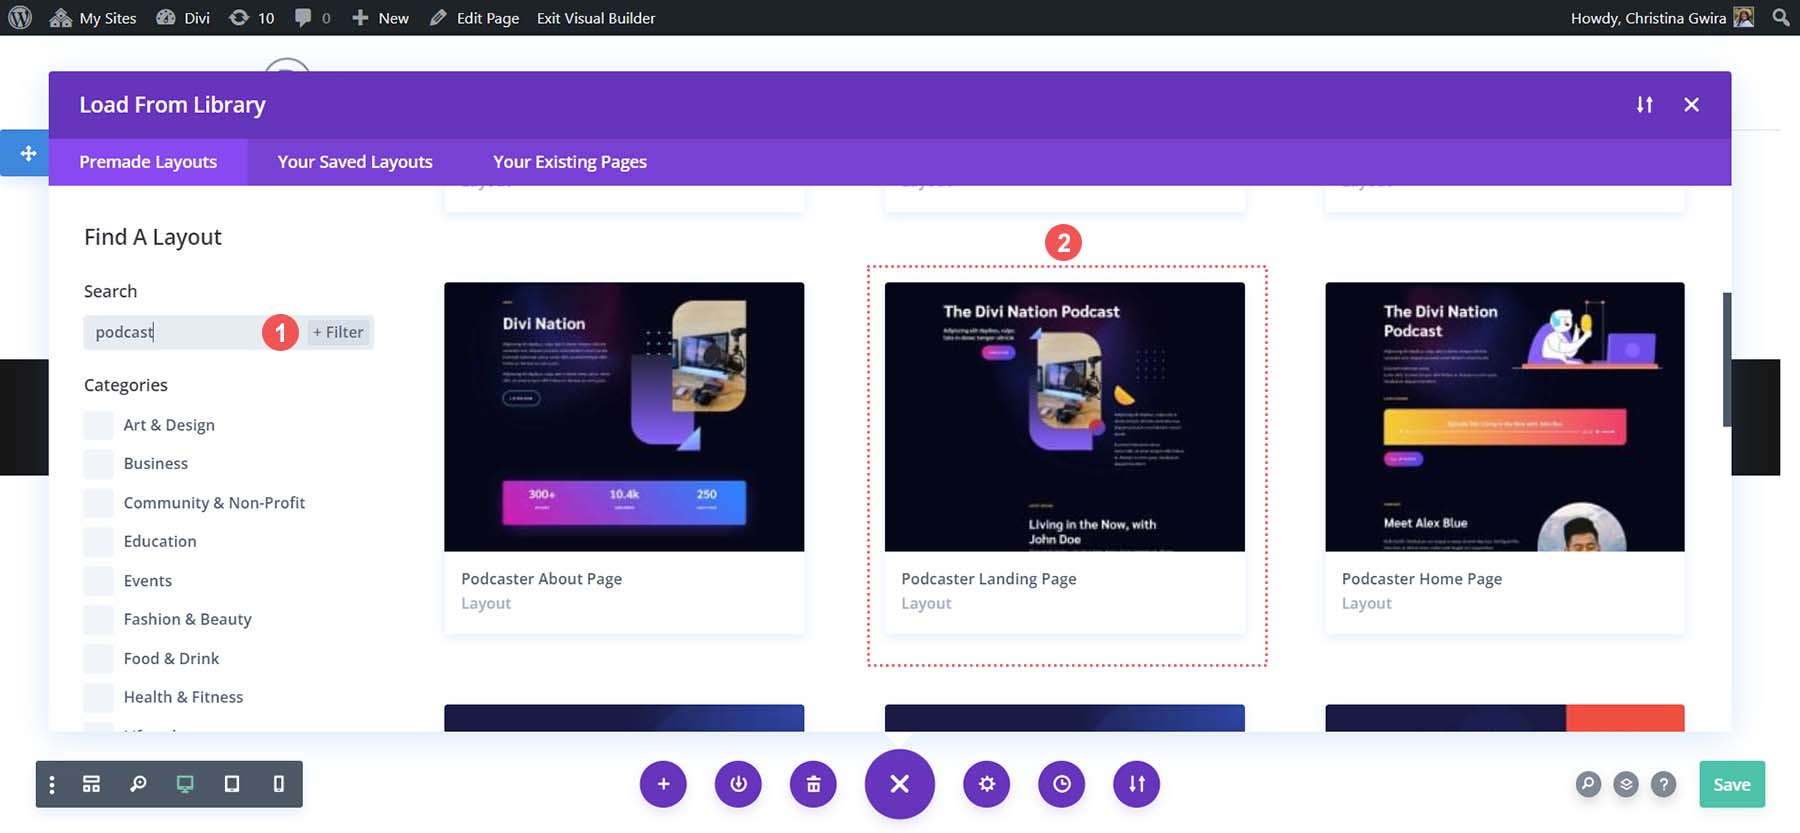 Select the Landing Page Layout from the Podcaster Layout Pack